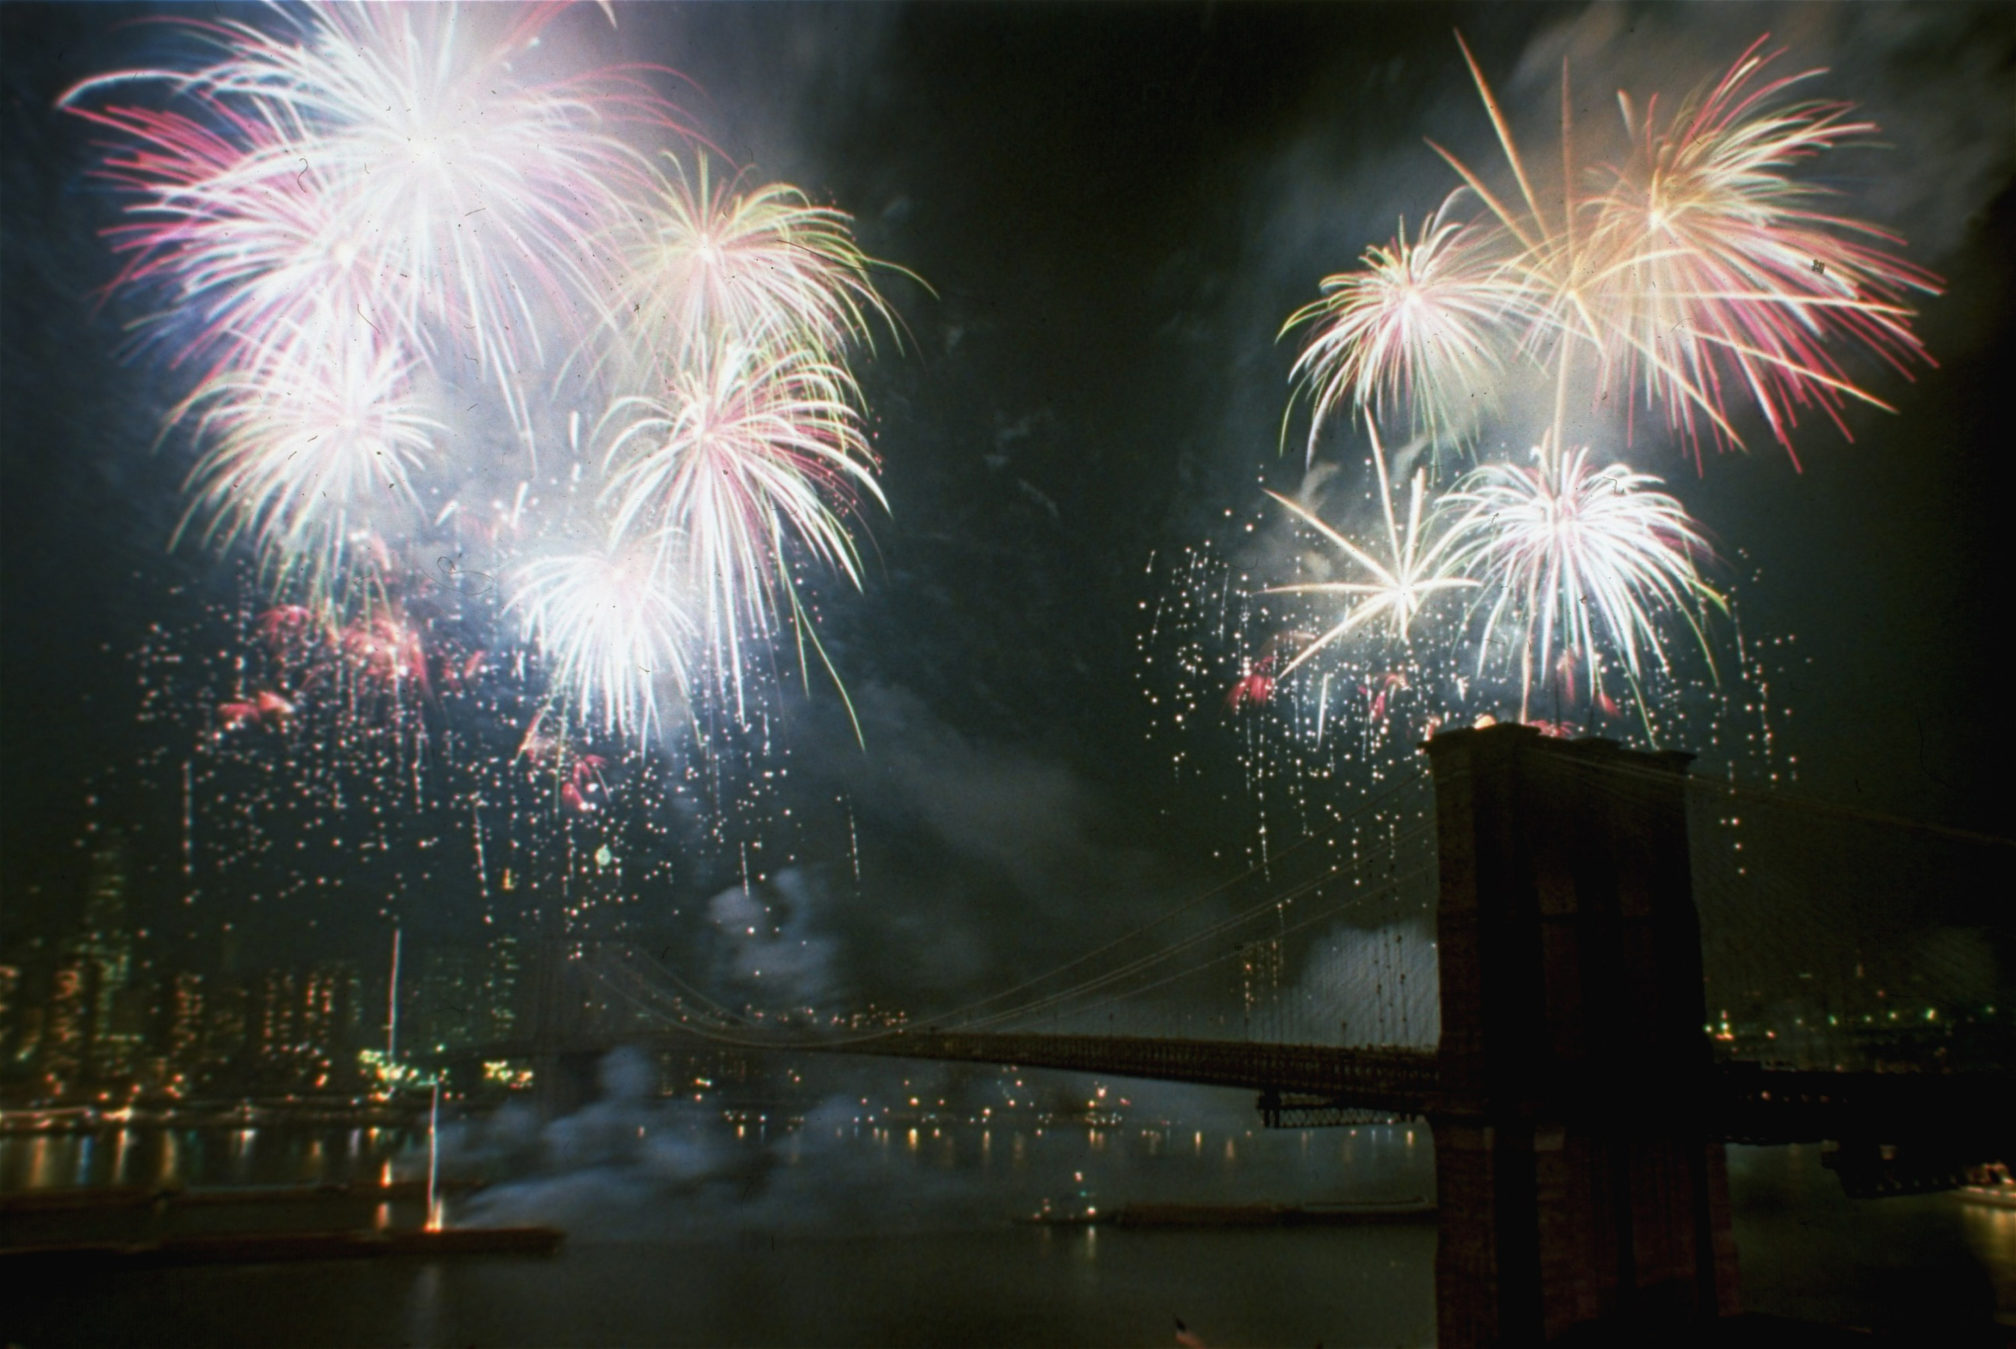 Ask a historian What's the story of fireworks in Brooklyn?